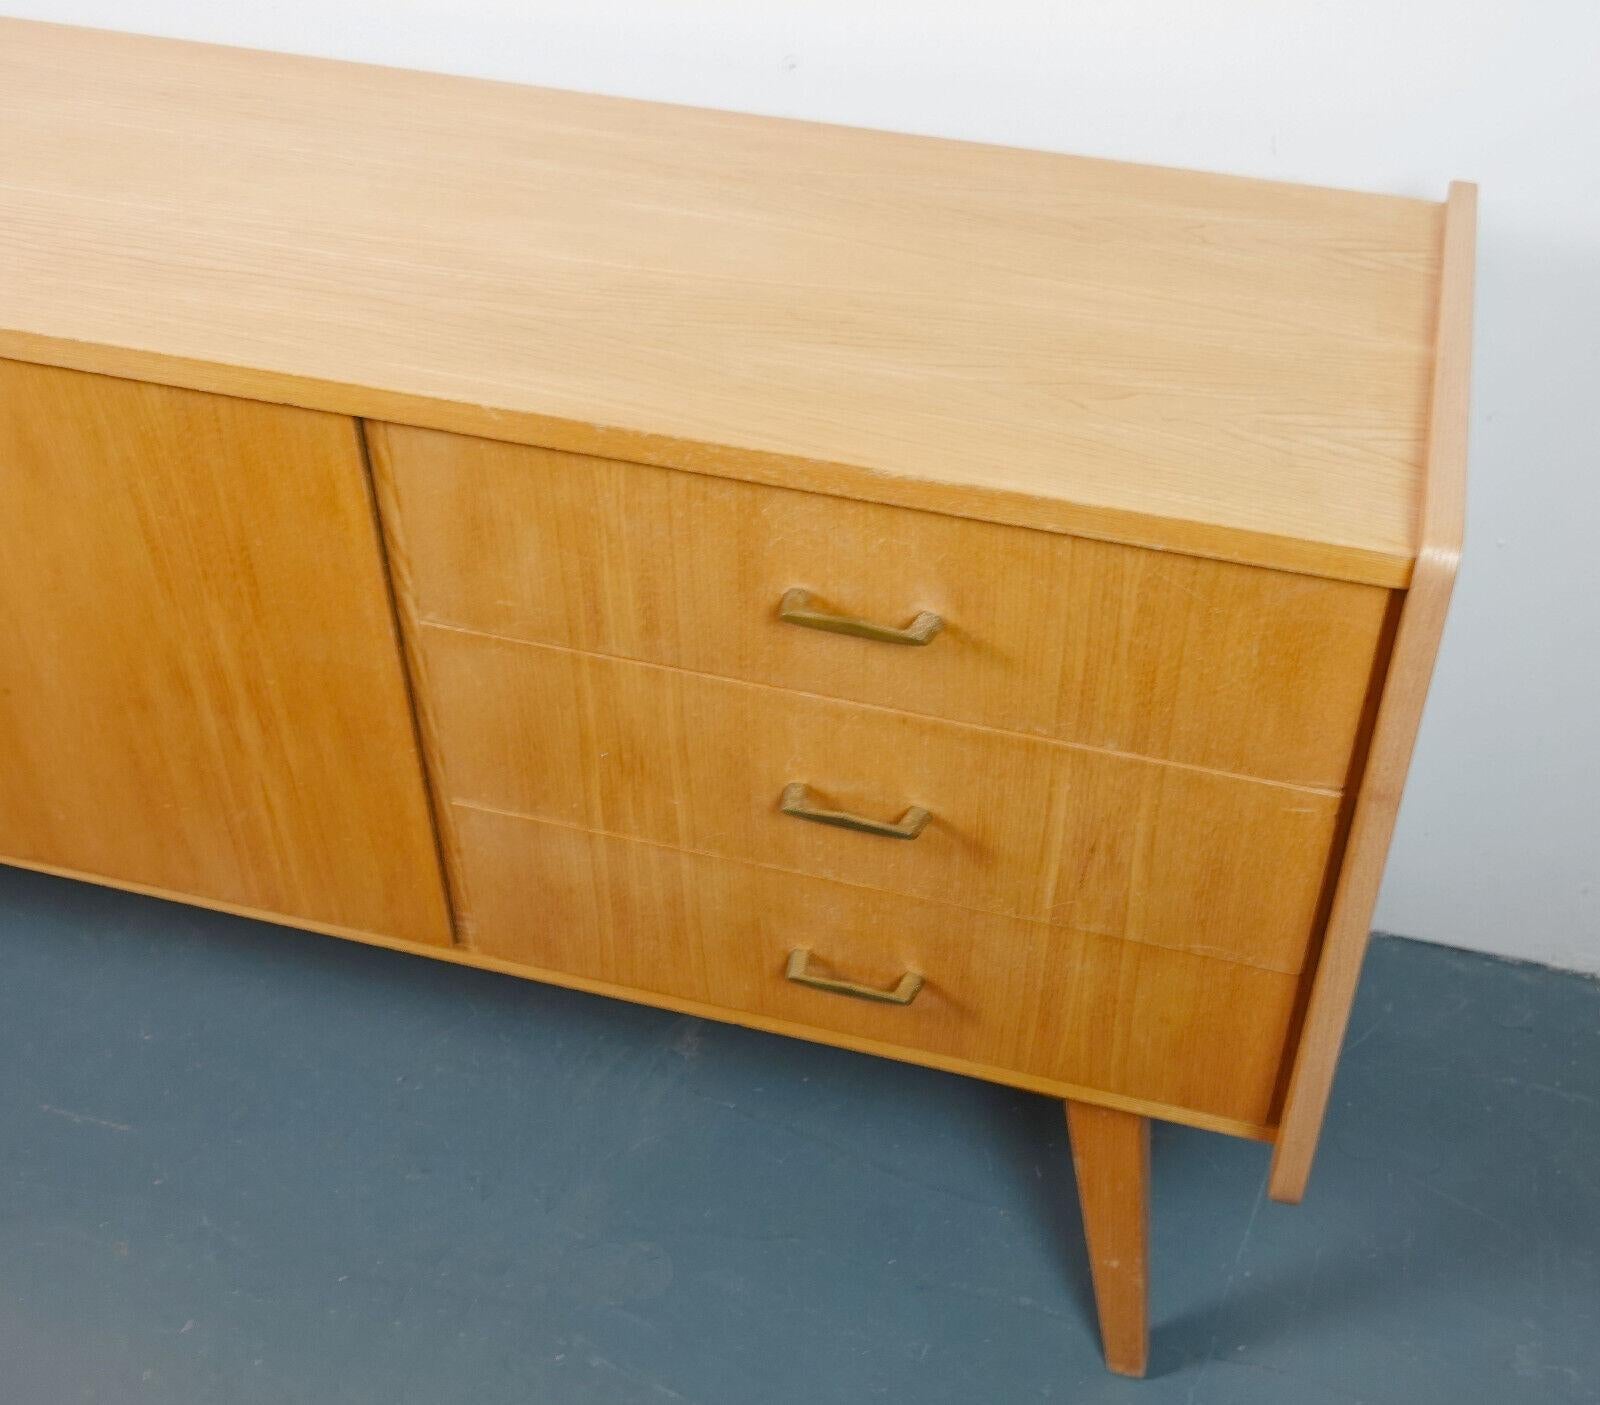 Elegant Mid Century Modern sideboard from the 50s, manufactured by Bartels-Werke. The body is completely coated with Rüster real wood veneer, the interior is veneered with mahogany. The sideboard stands on slanted legs.
On the left is a double door